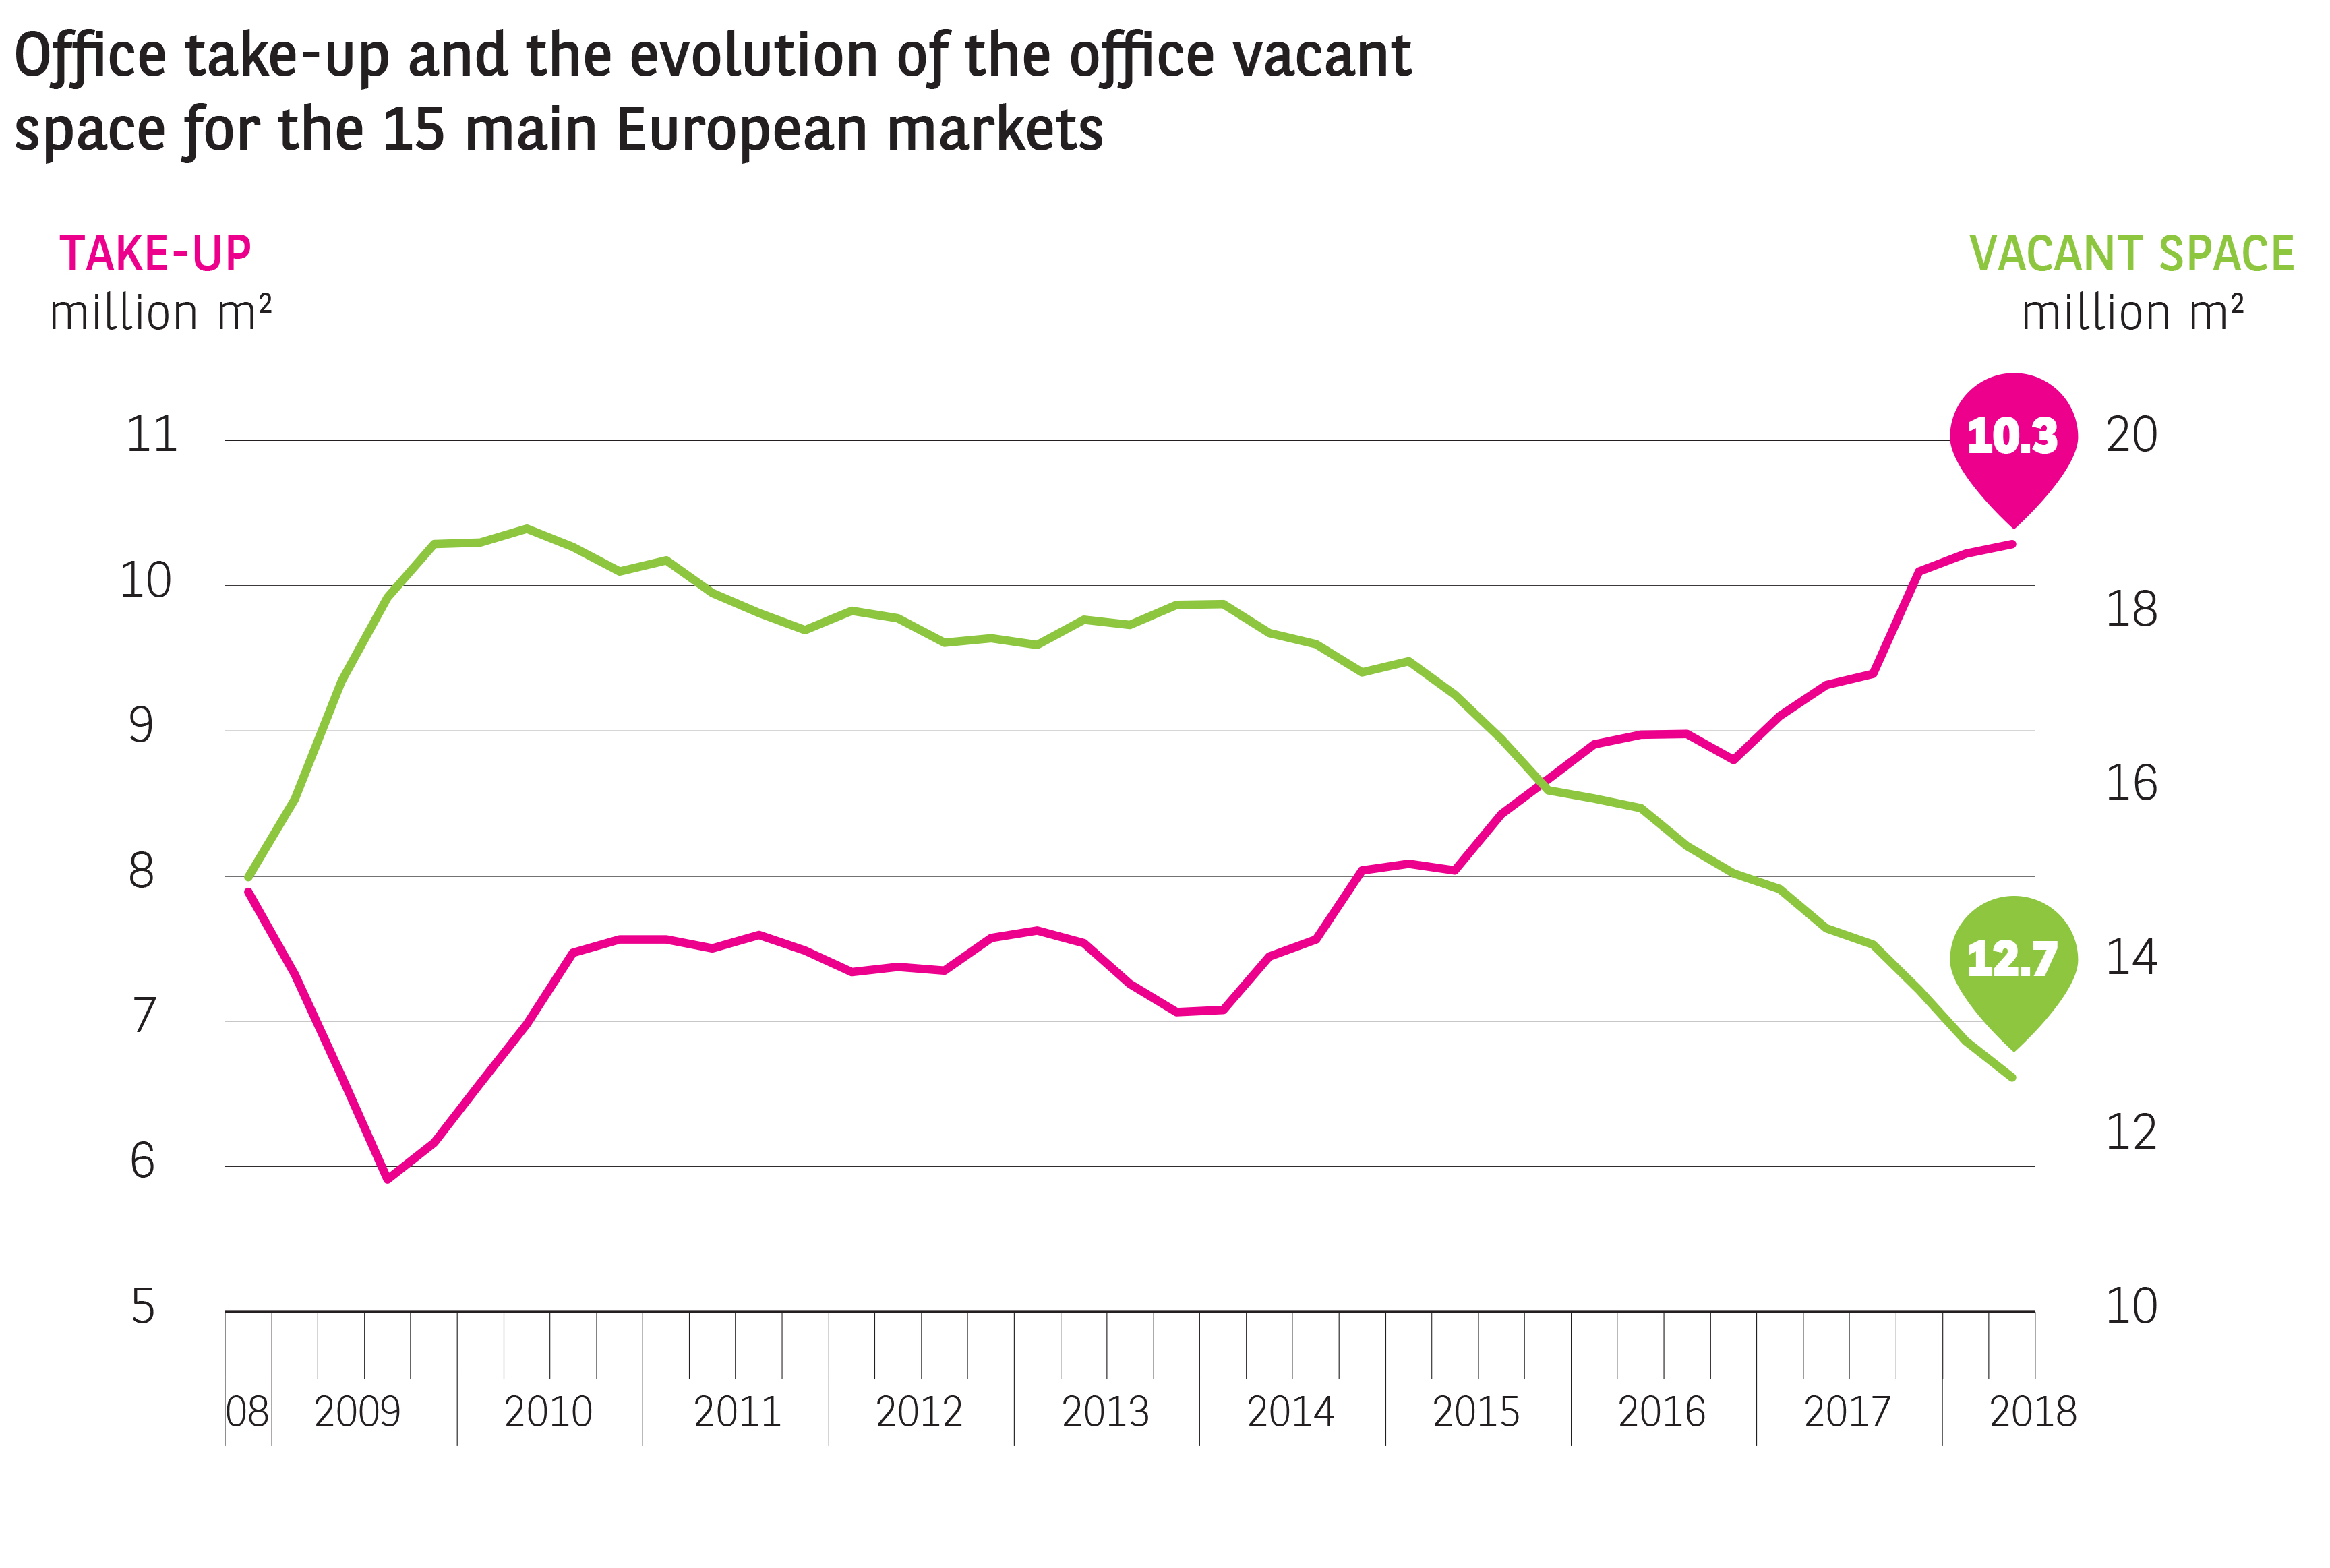 TAKE UP EVOLUTION OF THE OFFICE VACANT SPACE